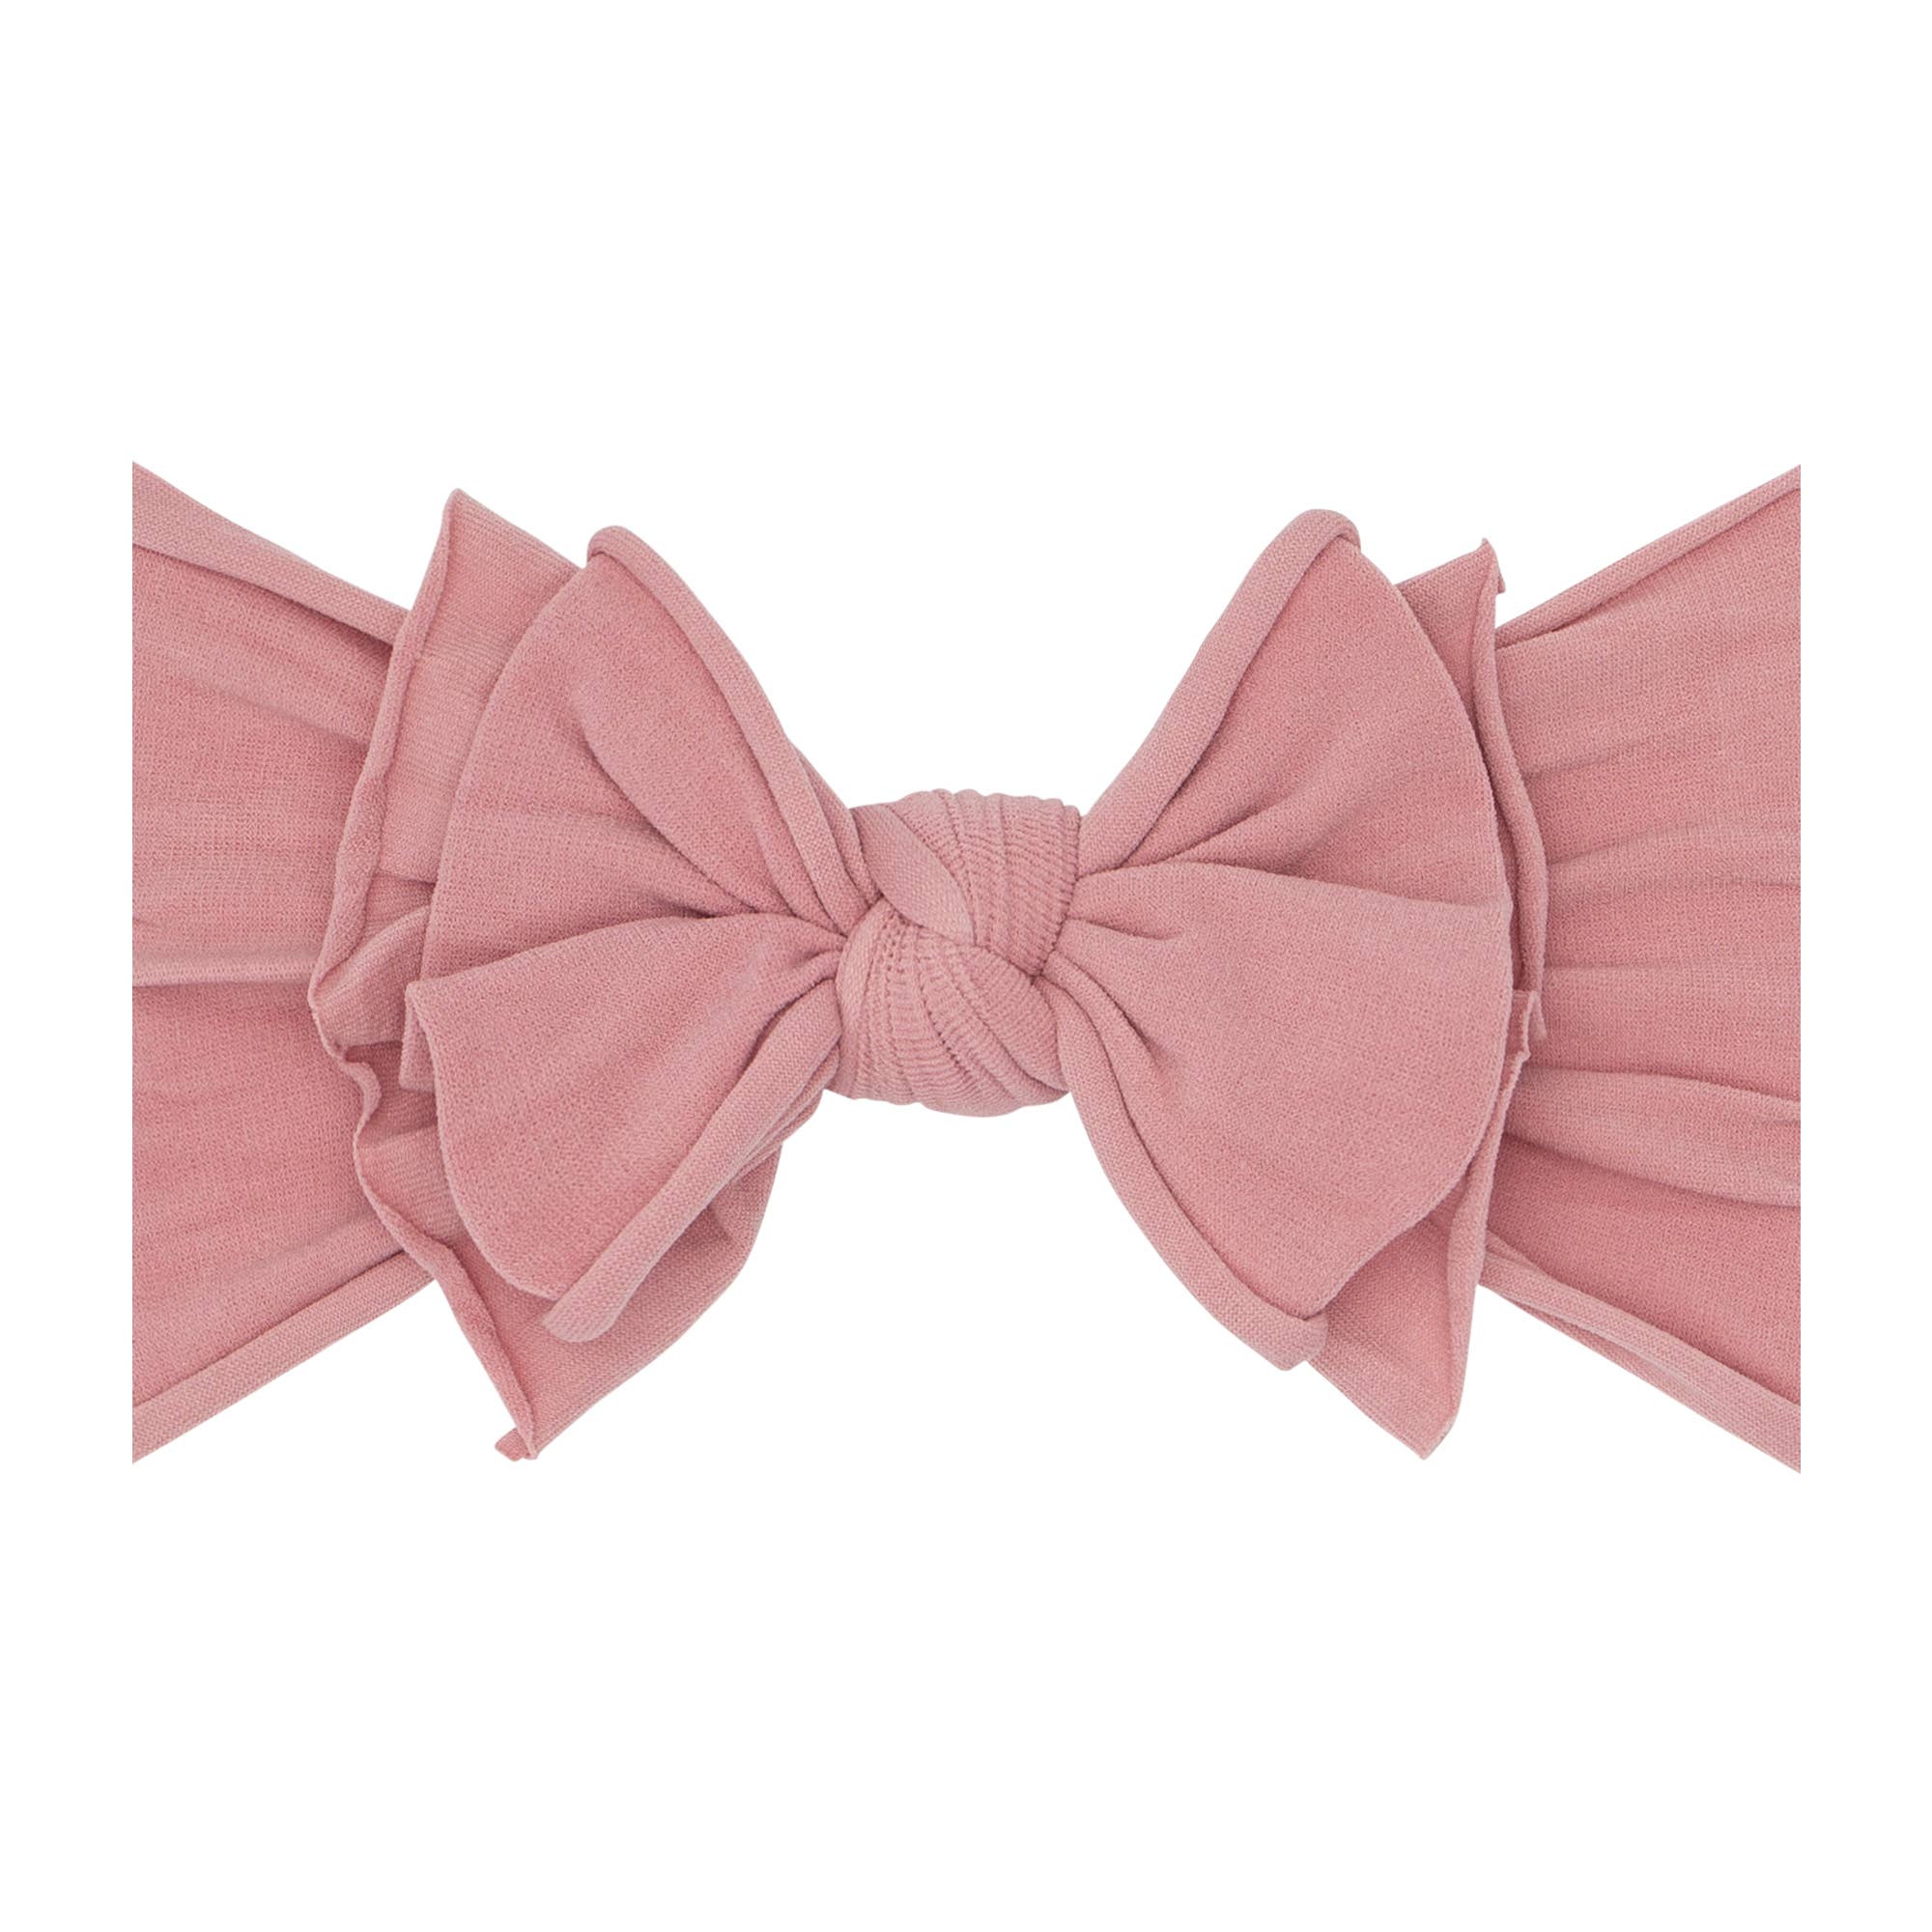 Baby Bling Bows - FAB-BOW-LOUS®: mauve 